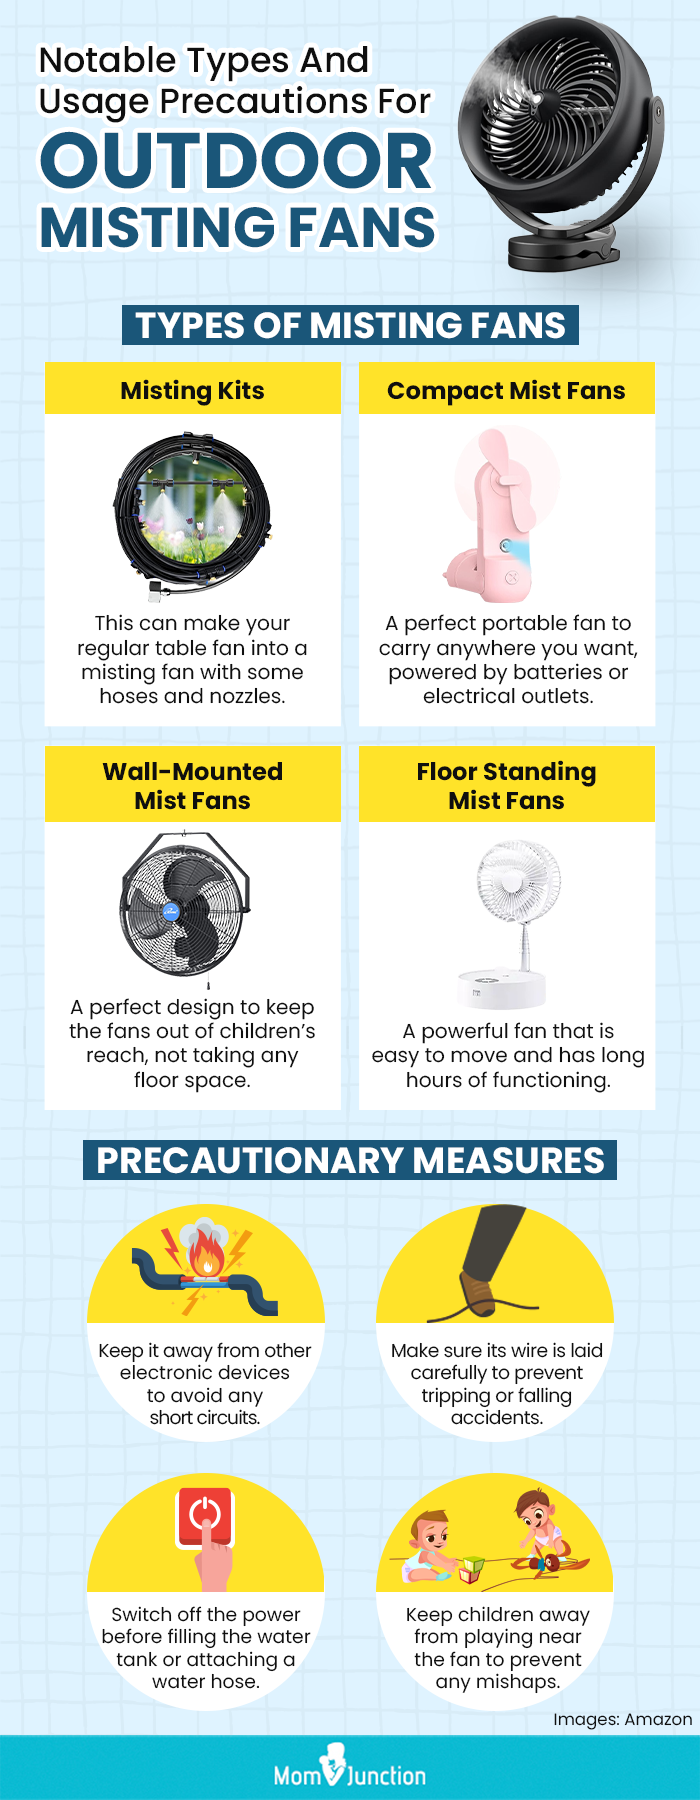 Notable Types And Usage Precautions For Outdoor Misting Fans (infographic)